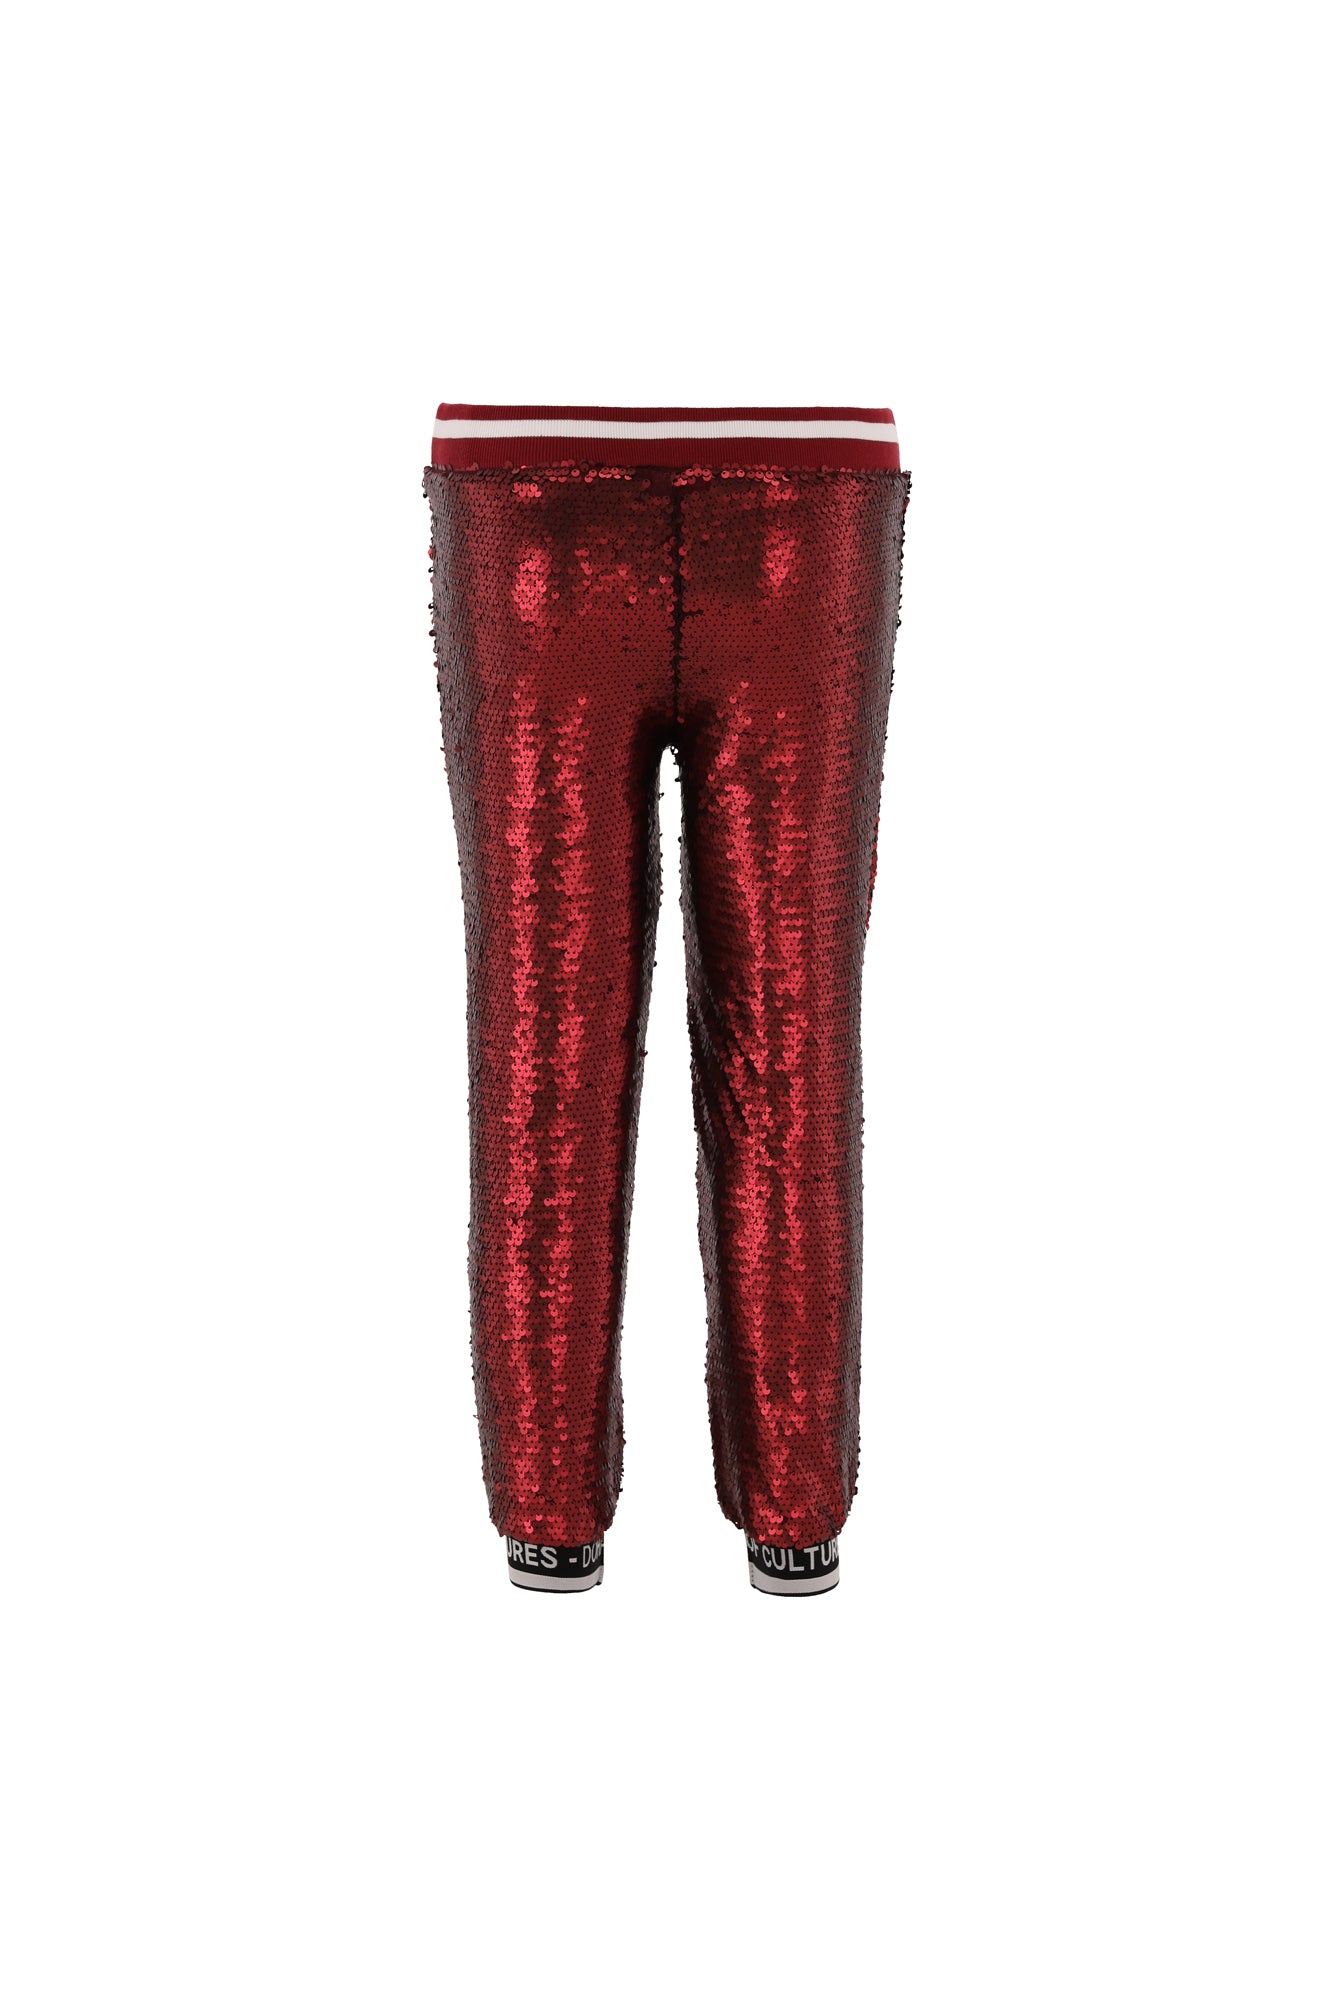 For the love of Sequin pants